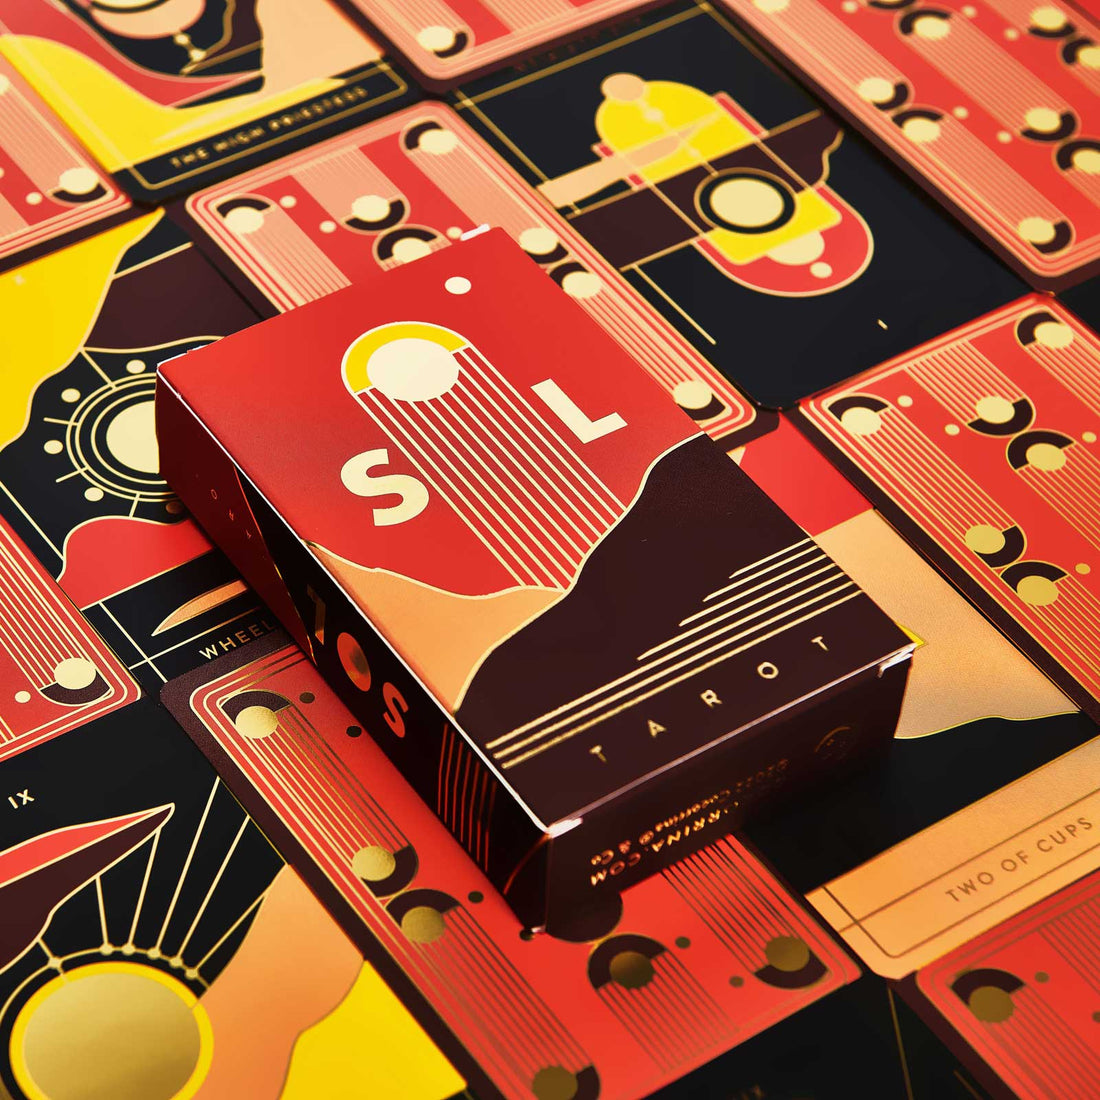 sol tarot cards deck by cocorrina